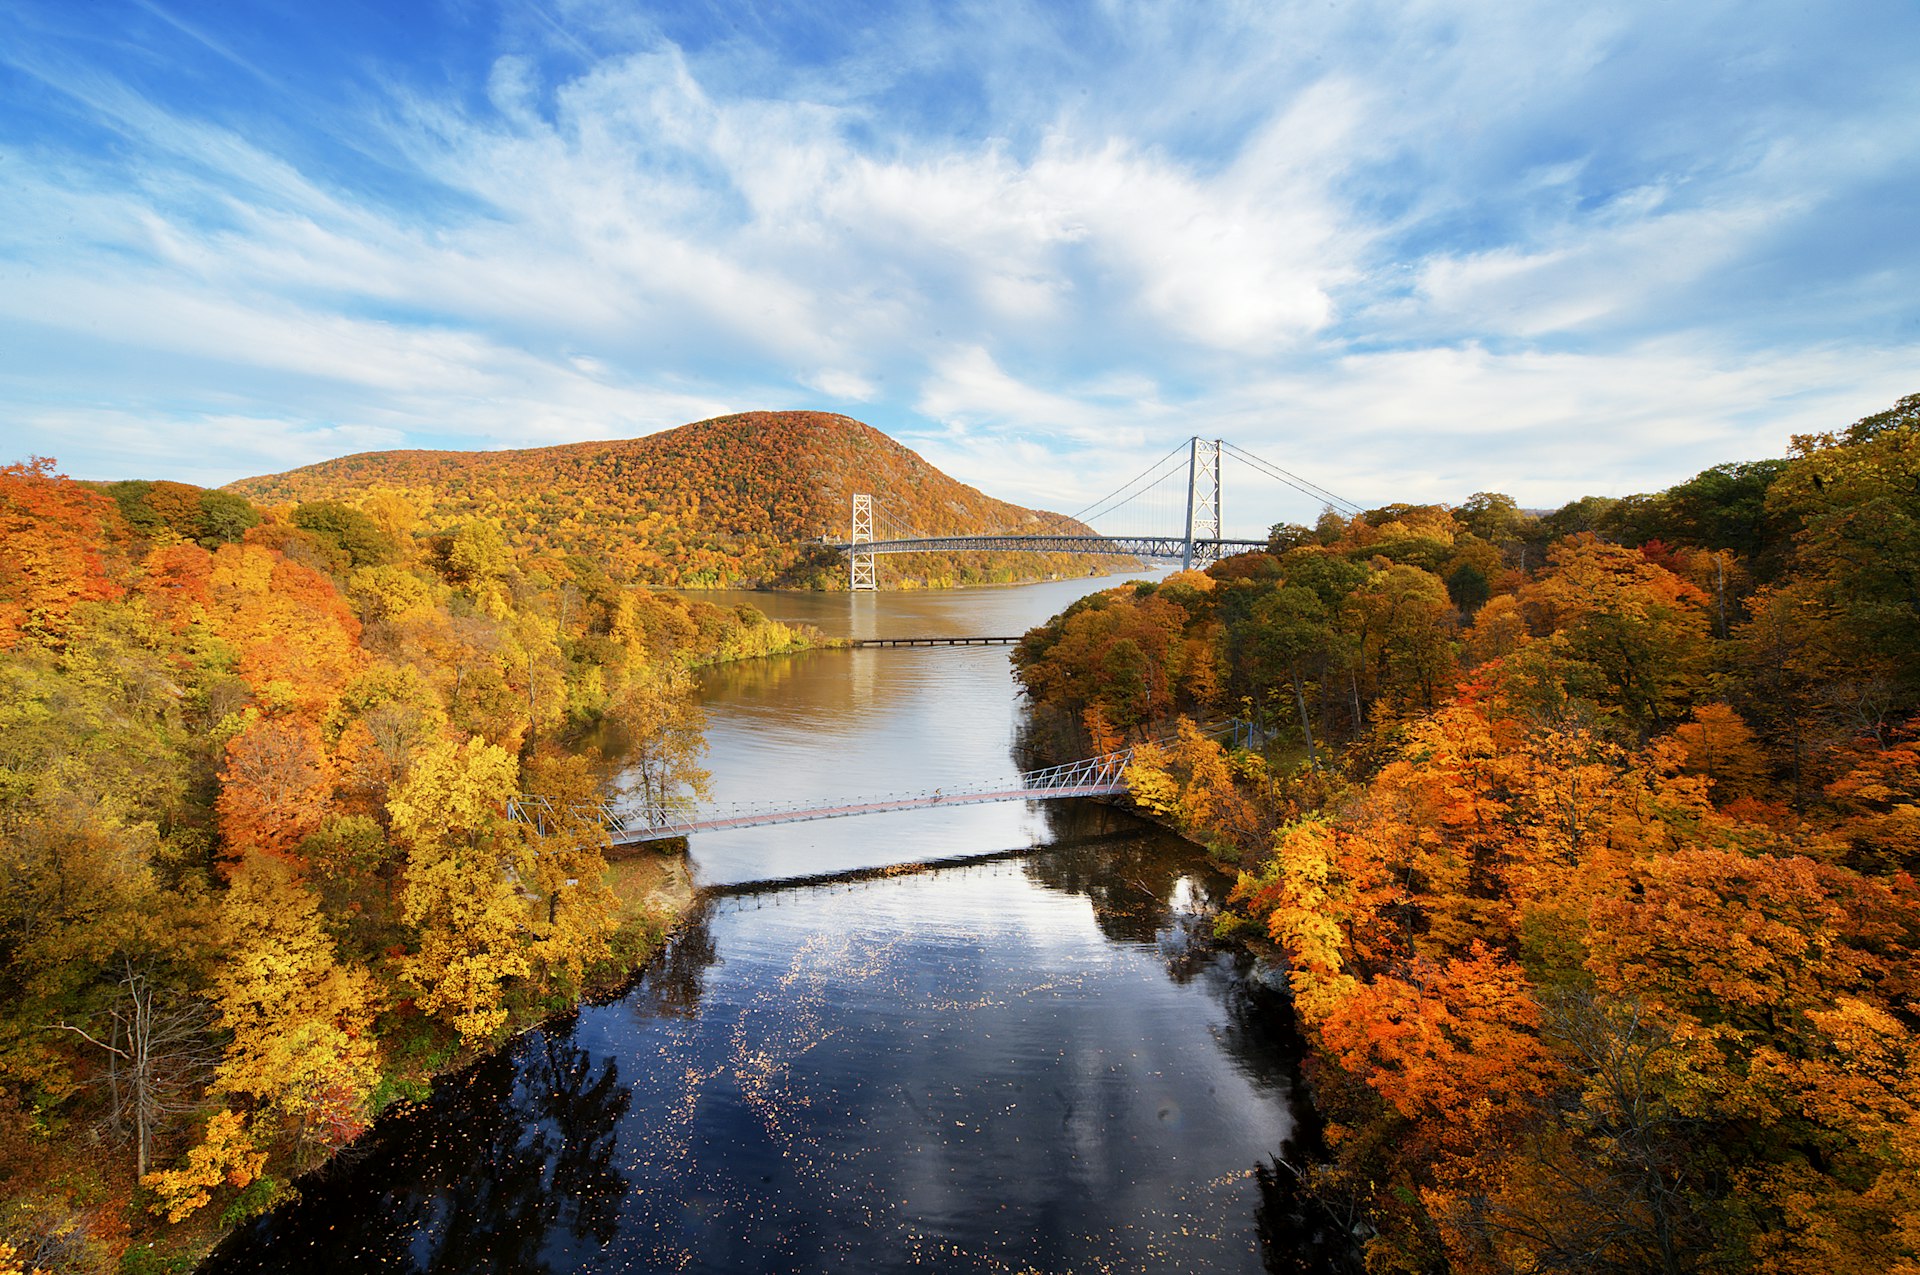 A river winds through lush fall foliage with a bridge in the distance